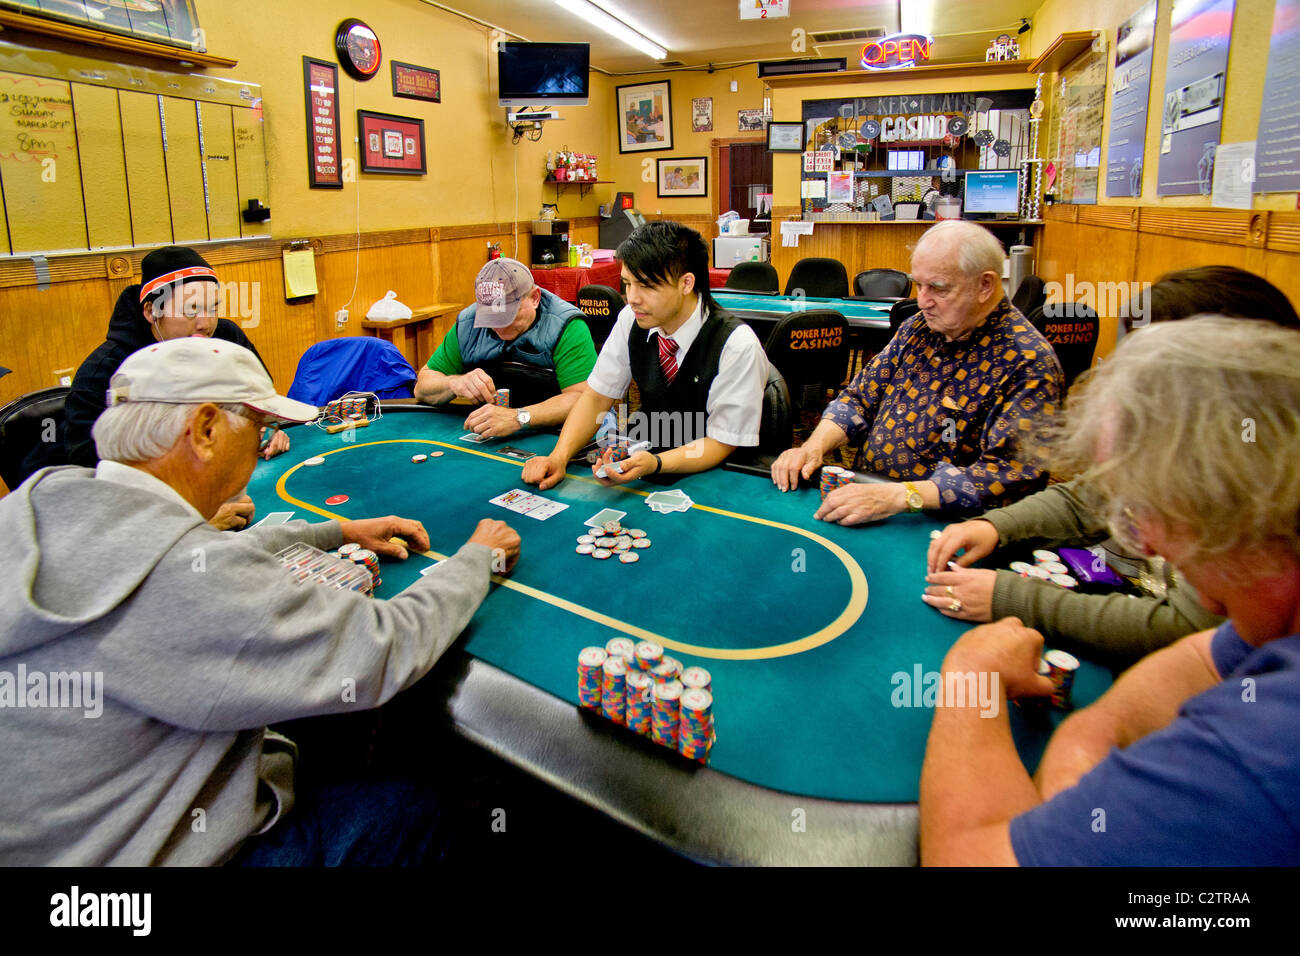 Gamblers of different ages and races play Texas Hold'Em poker at a store  front casino in Merced, CA Stock Photo - Alamy